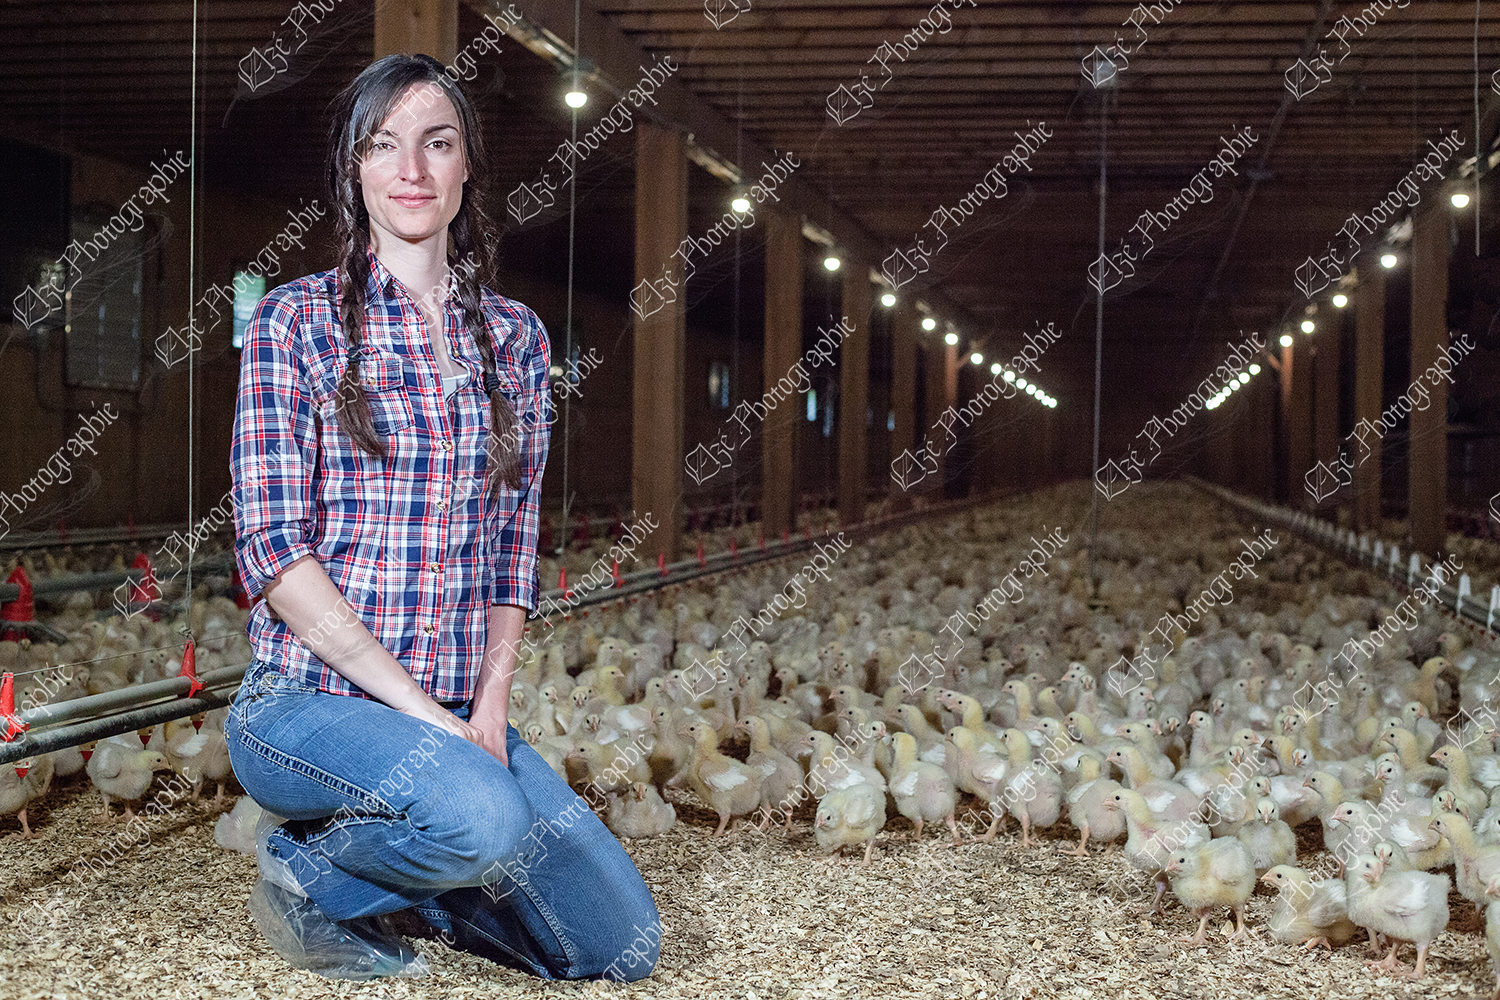 elze_photo_9037_poulet_agricultrice_poulailler_woman_agriculture